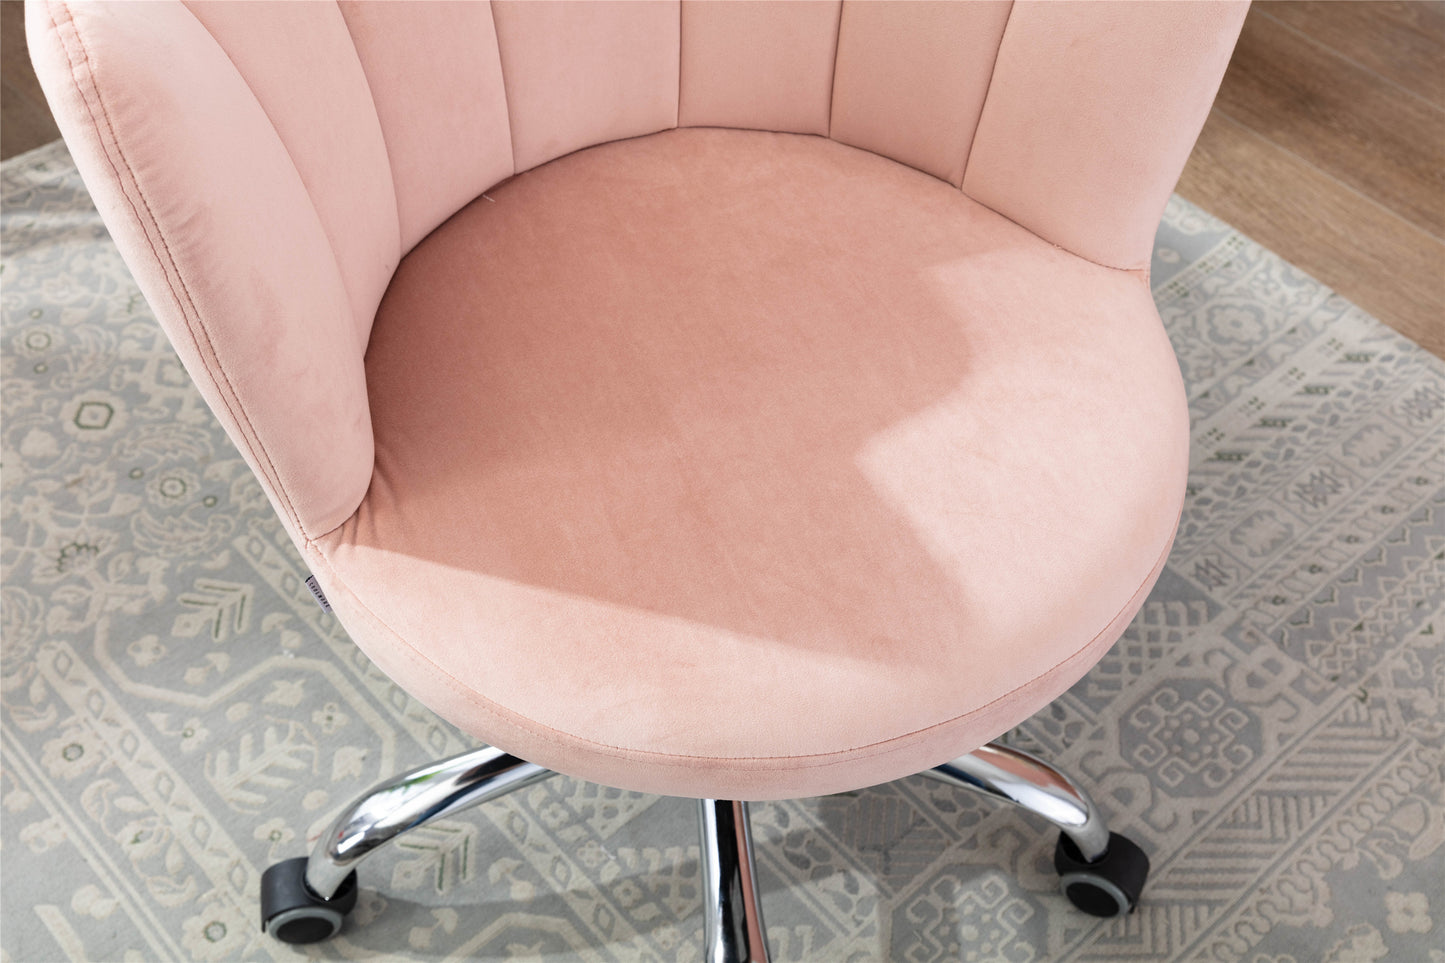 Swivel Shell Chair for Living Room/Bed Room, Modern Leisure office Chair Pink